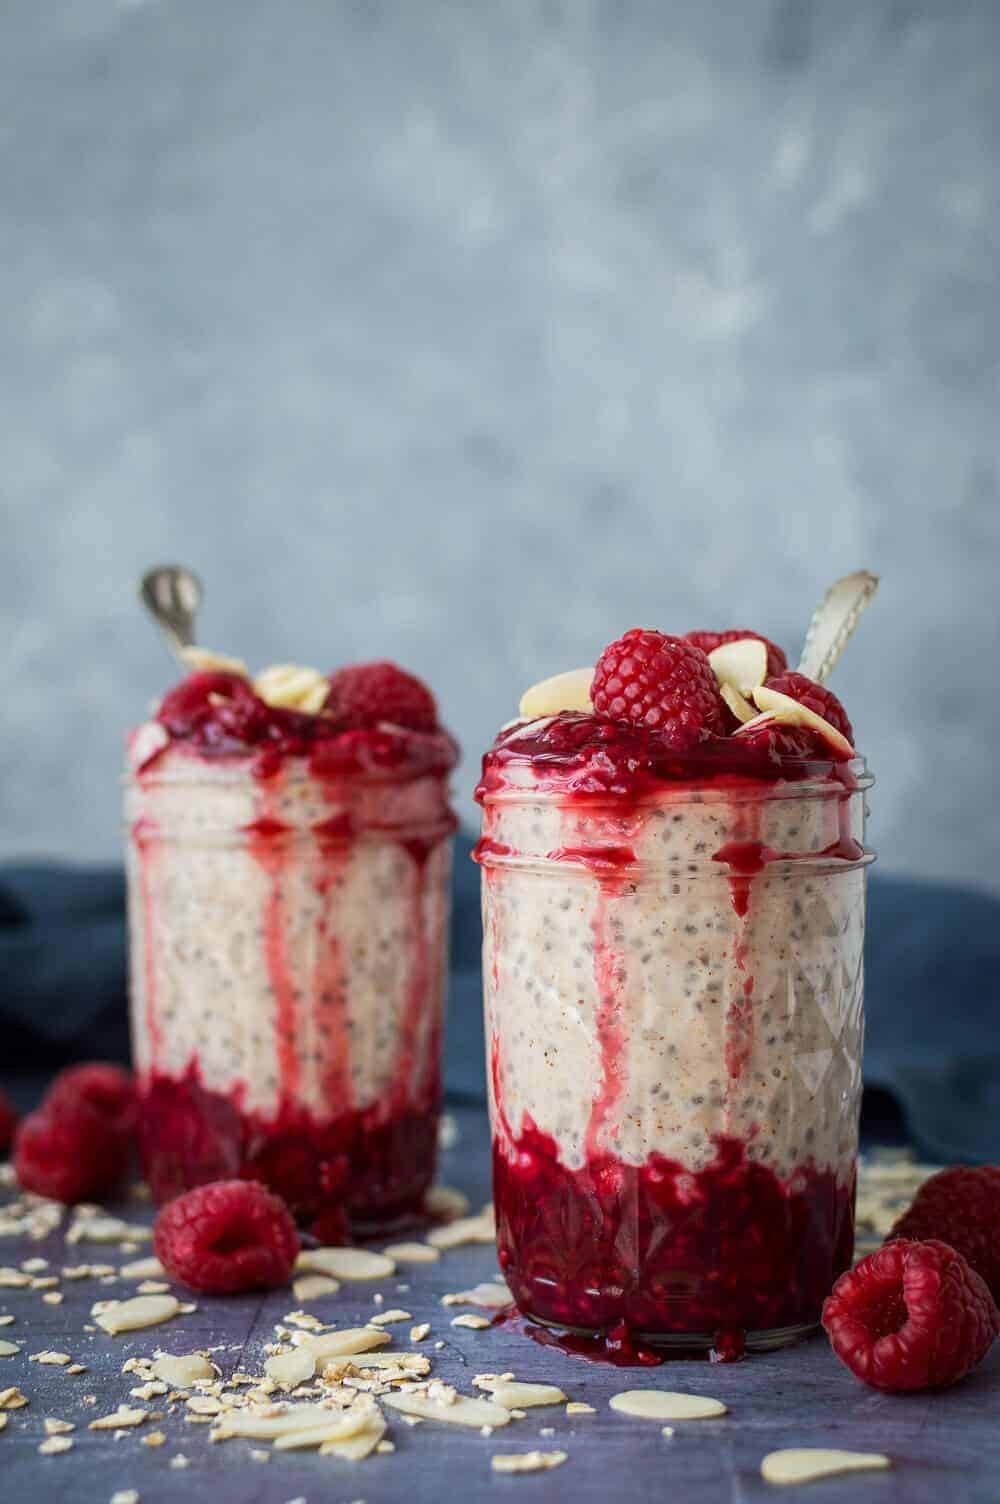 Raspberry almond overnight oats - get prepared with this super simple recipe for a tasty make-ahead breakfast of creamy almond flavoured oats with raspberry compote.